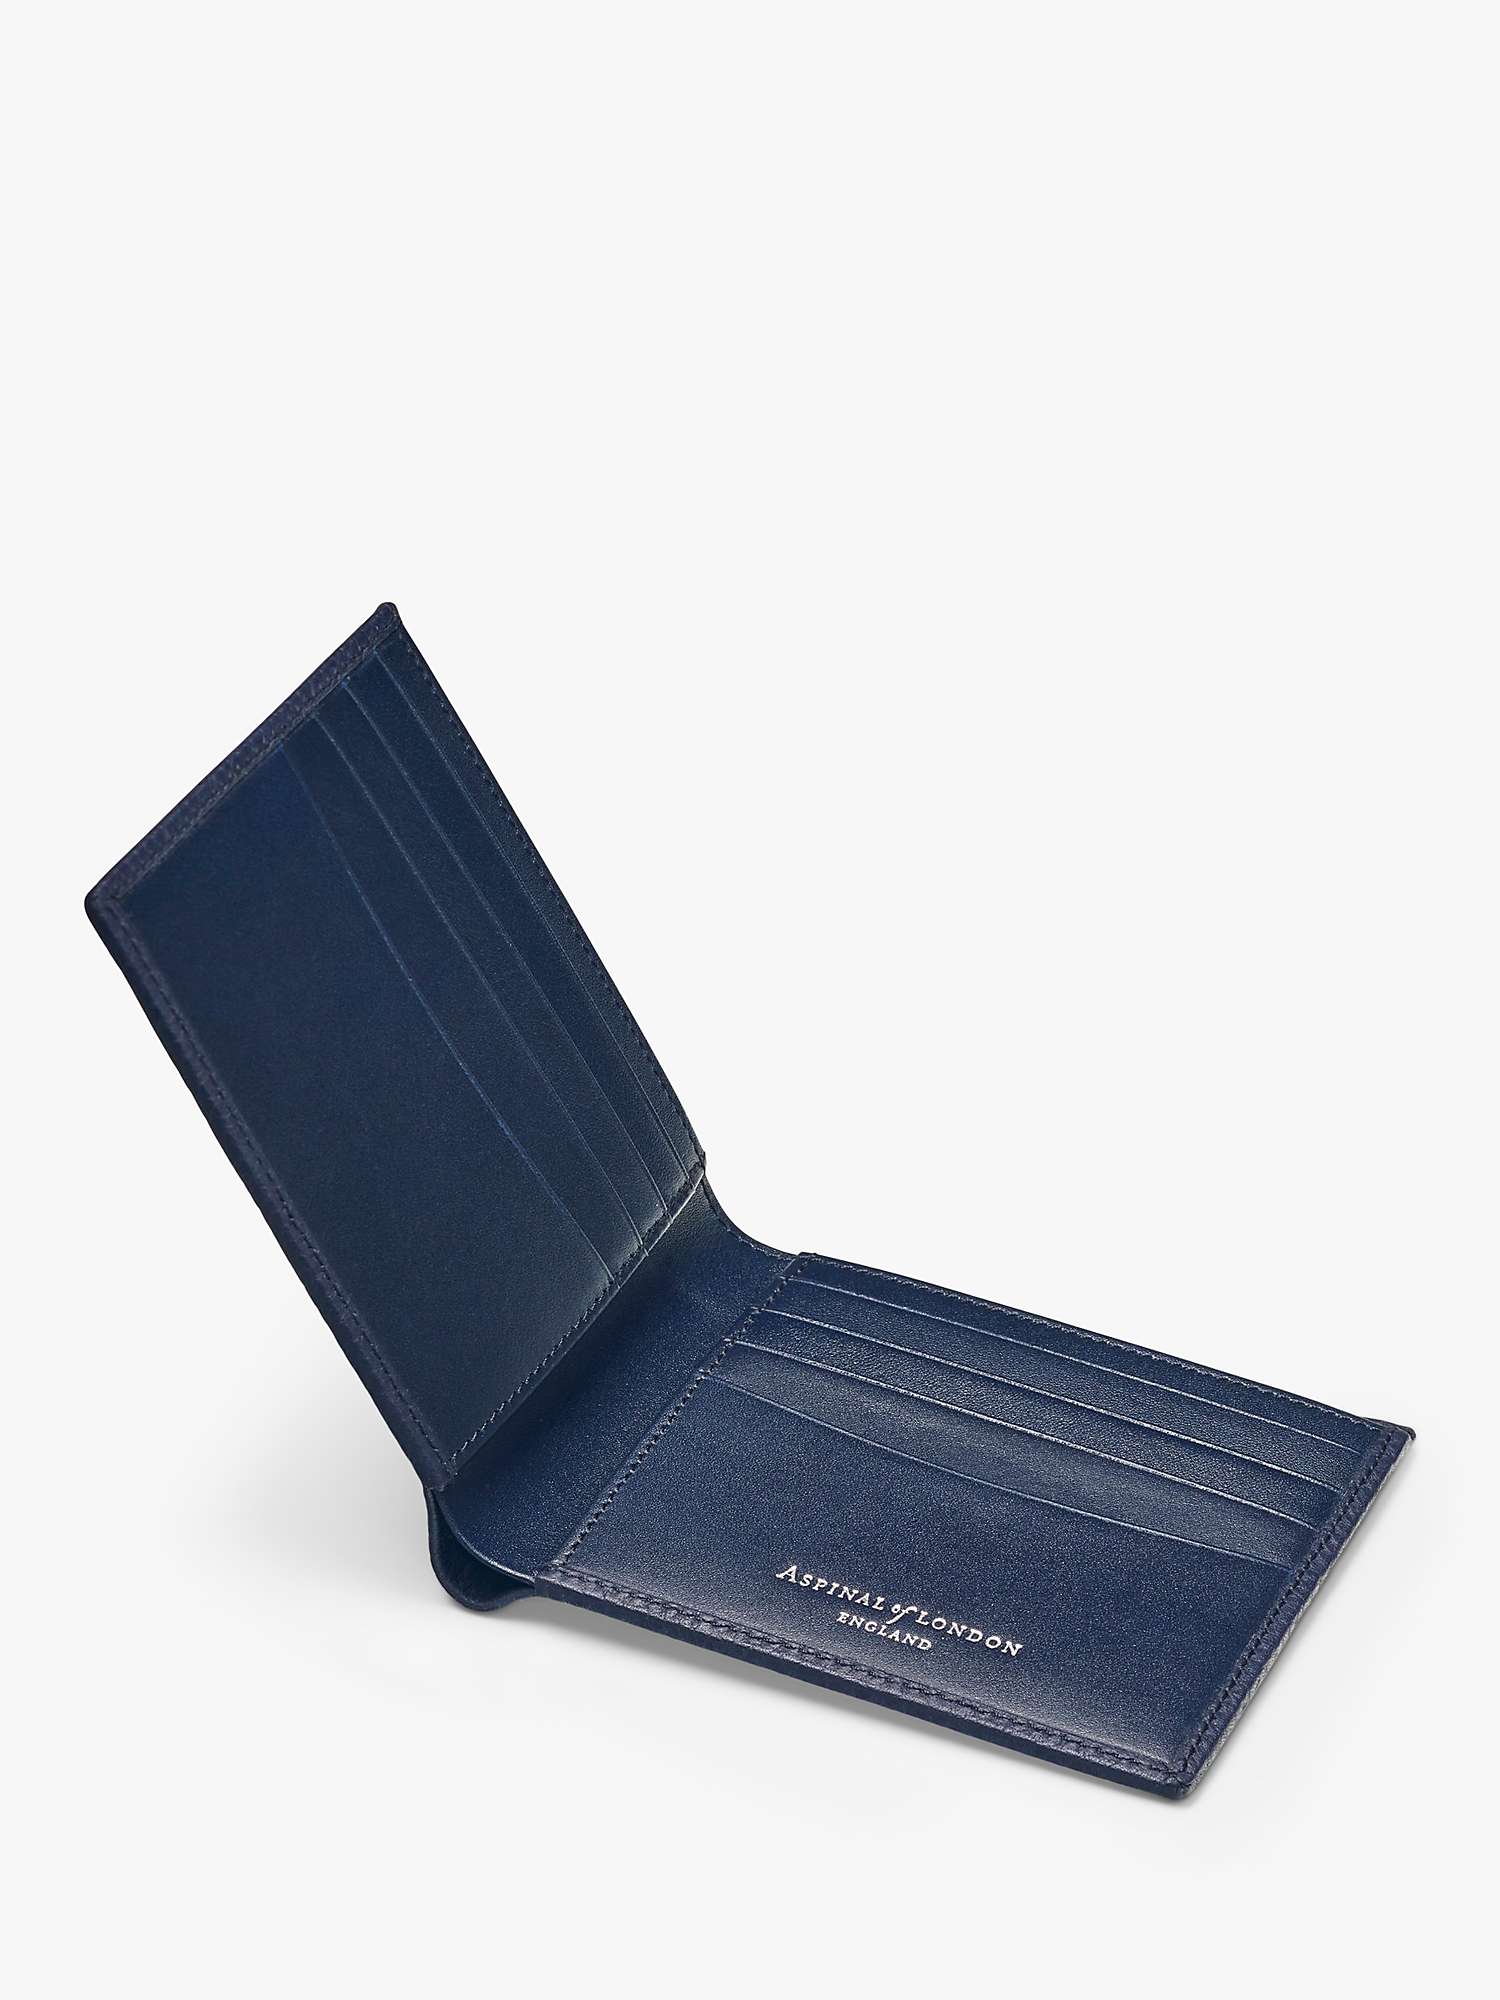 Buy Aspinal of London 8 Card Billfold Saffiano Leather Wallet Online at johnlewis.com